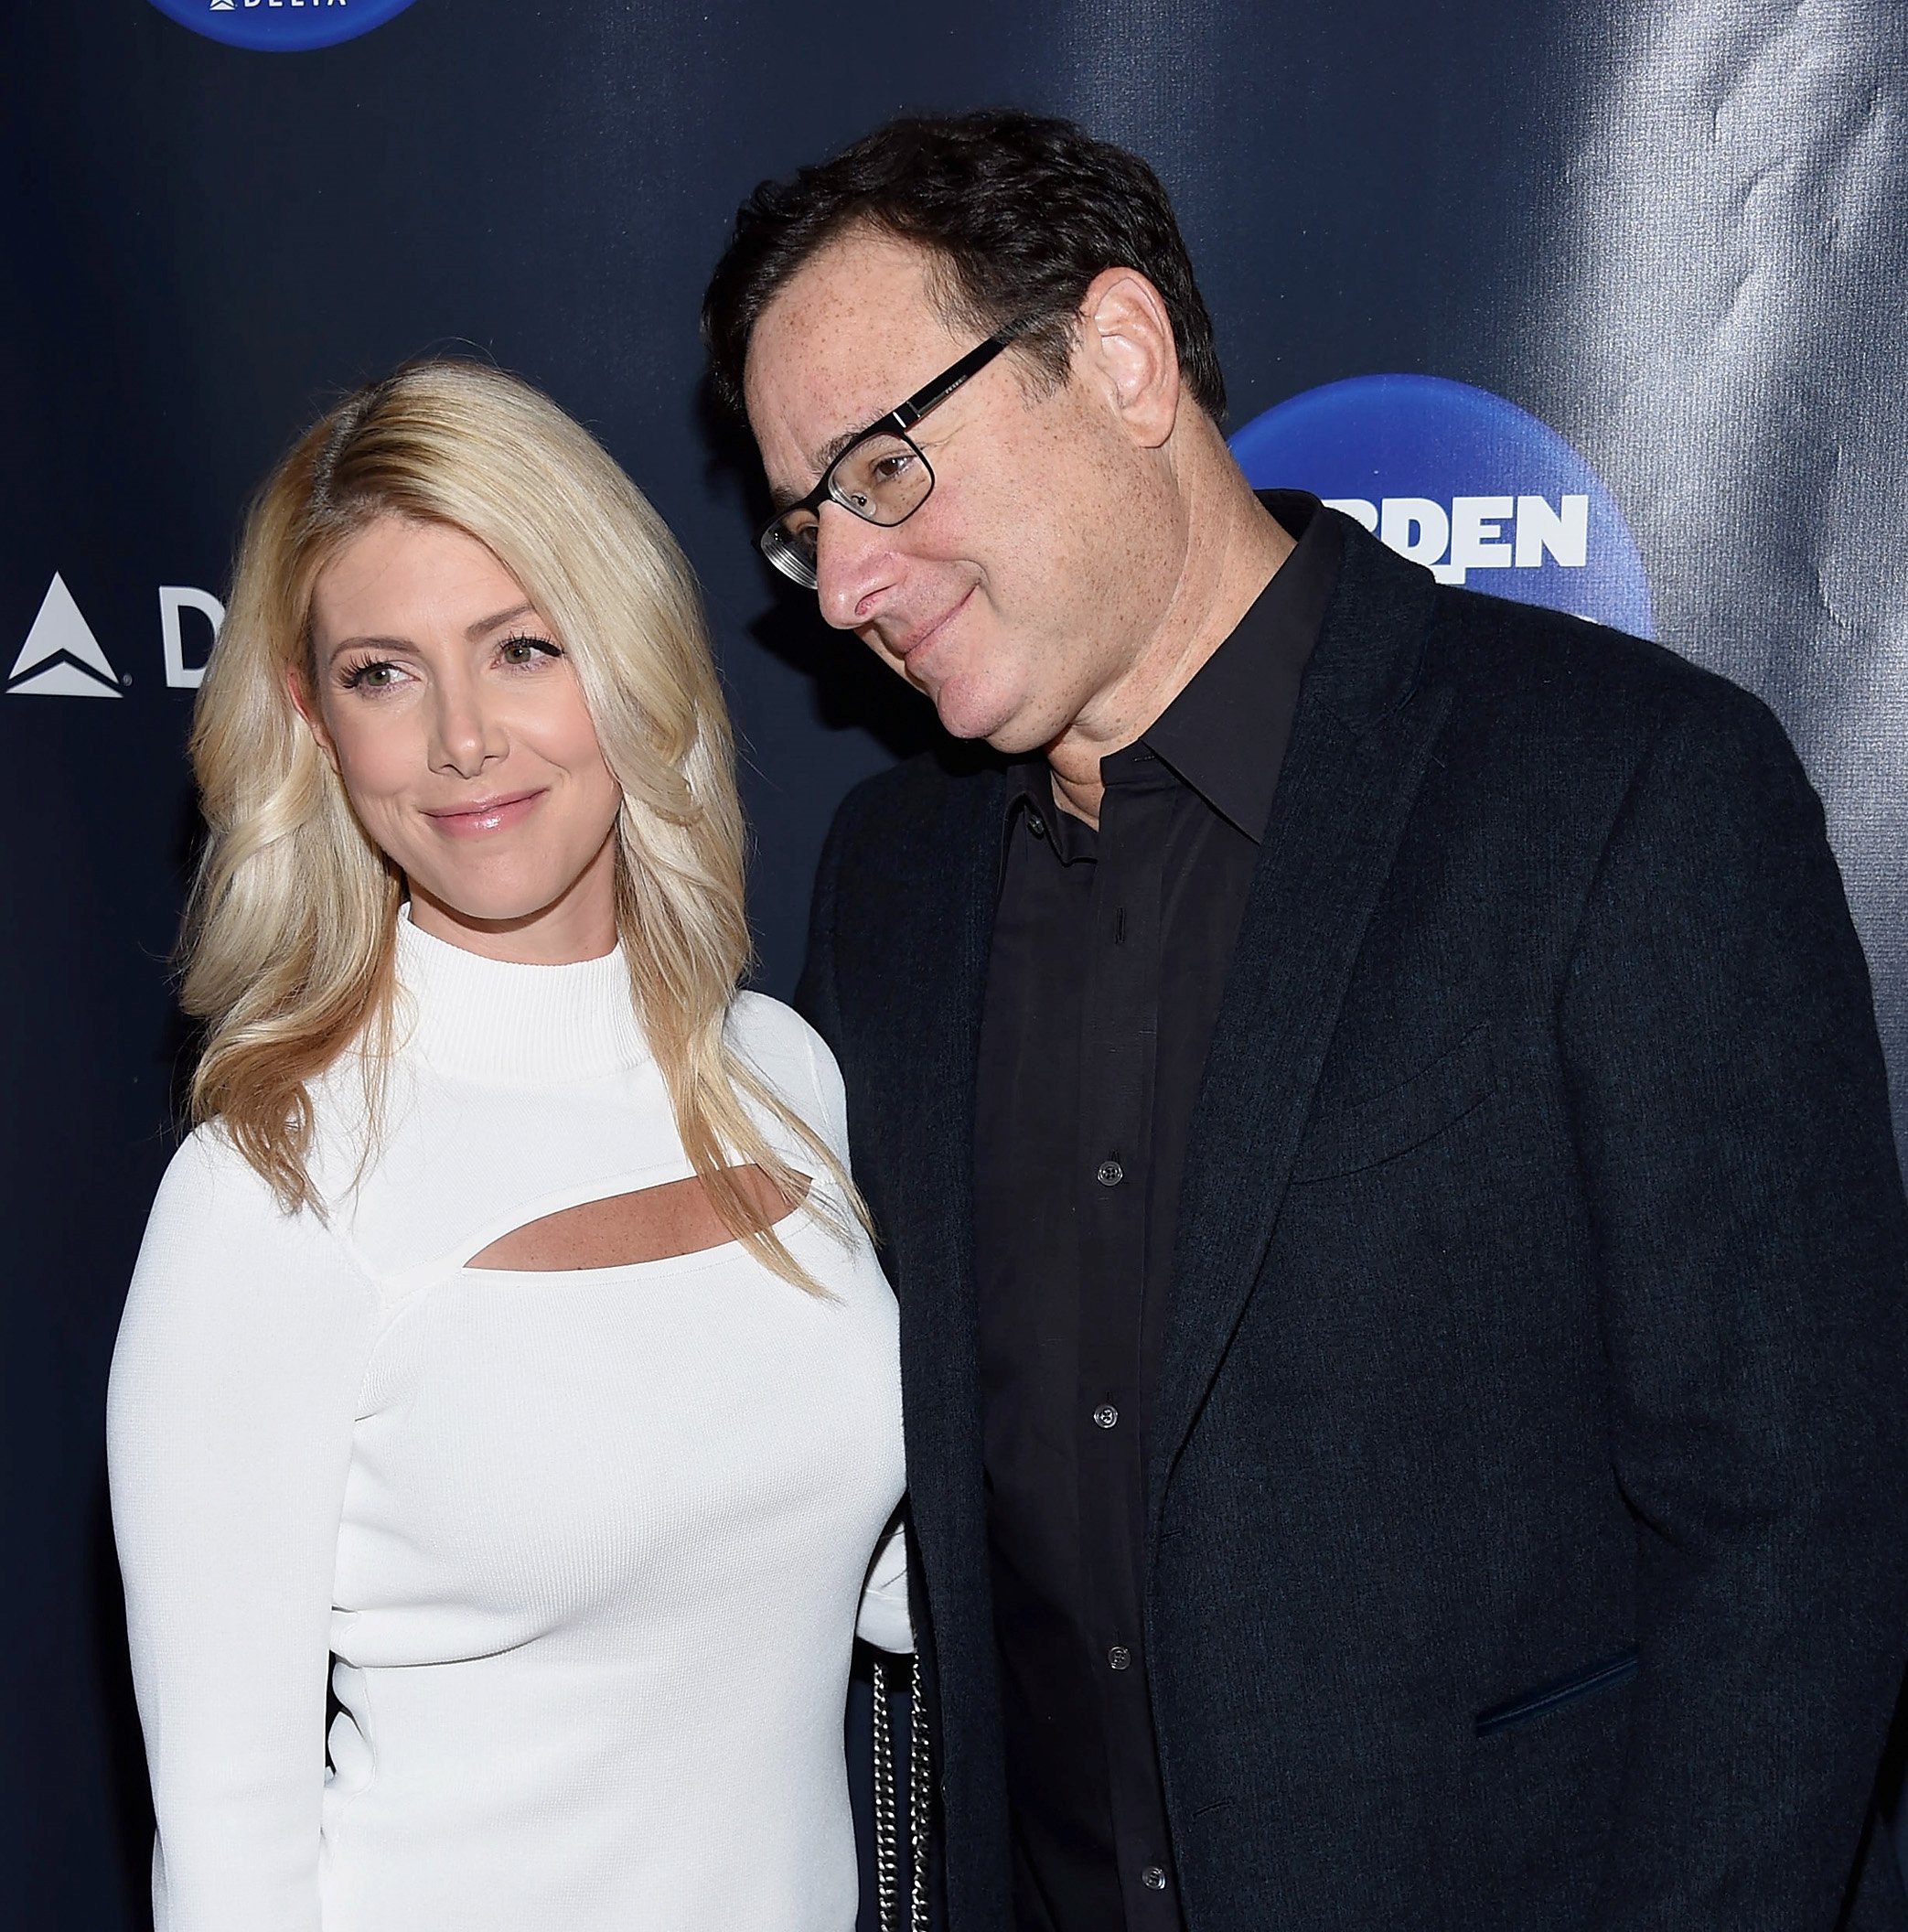 Kelly Rizzo and Bob Saget have their photo taken on the red carpet at the Garden Of Laughs Comedy Benefit